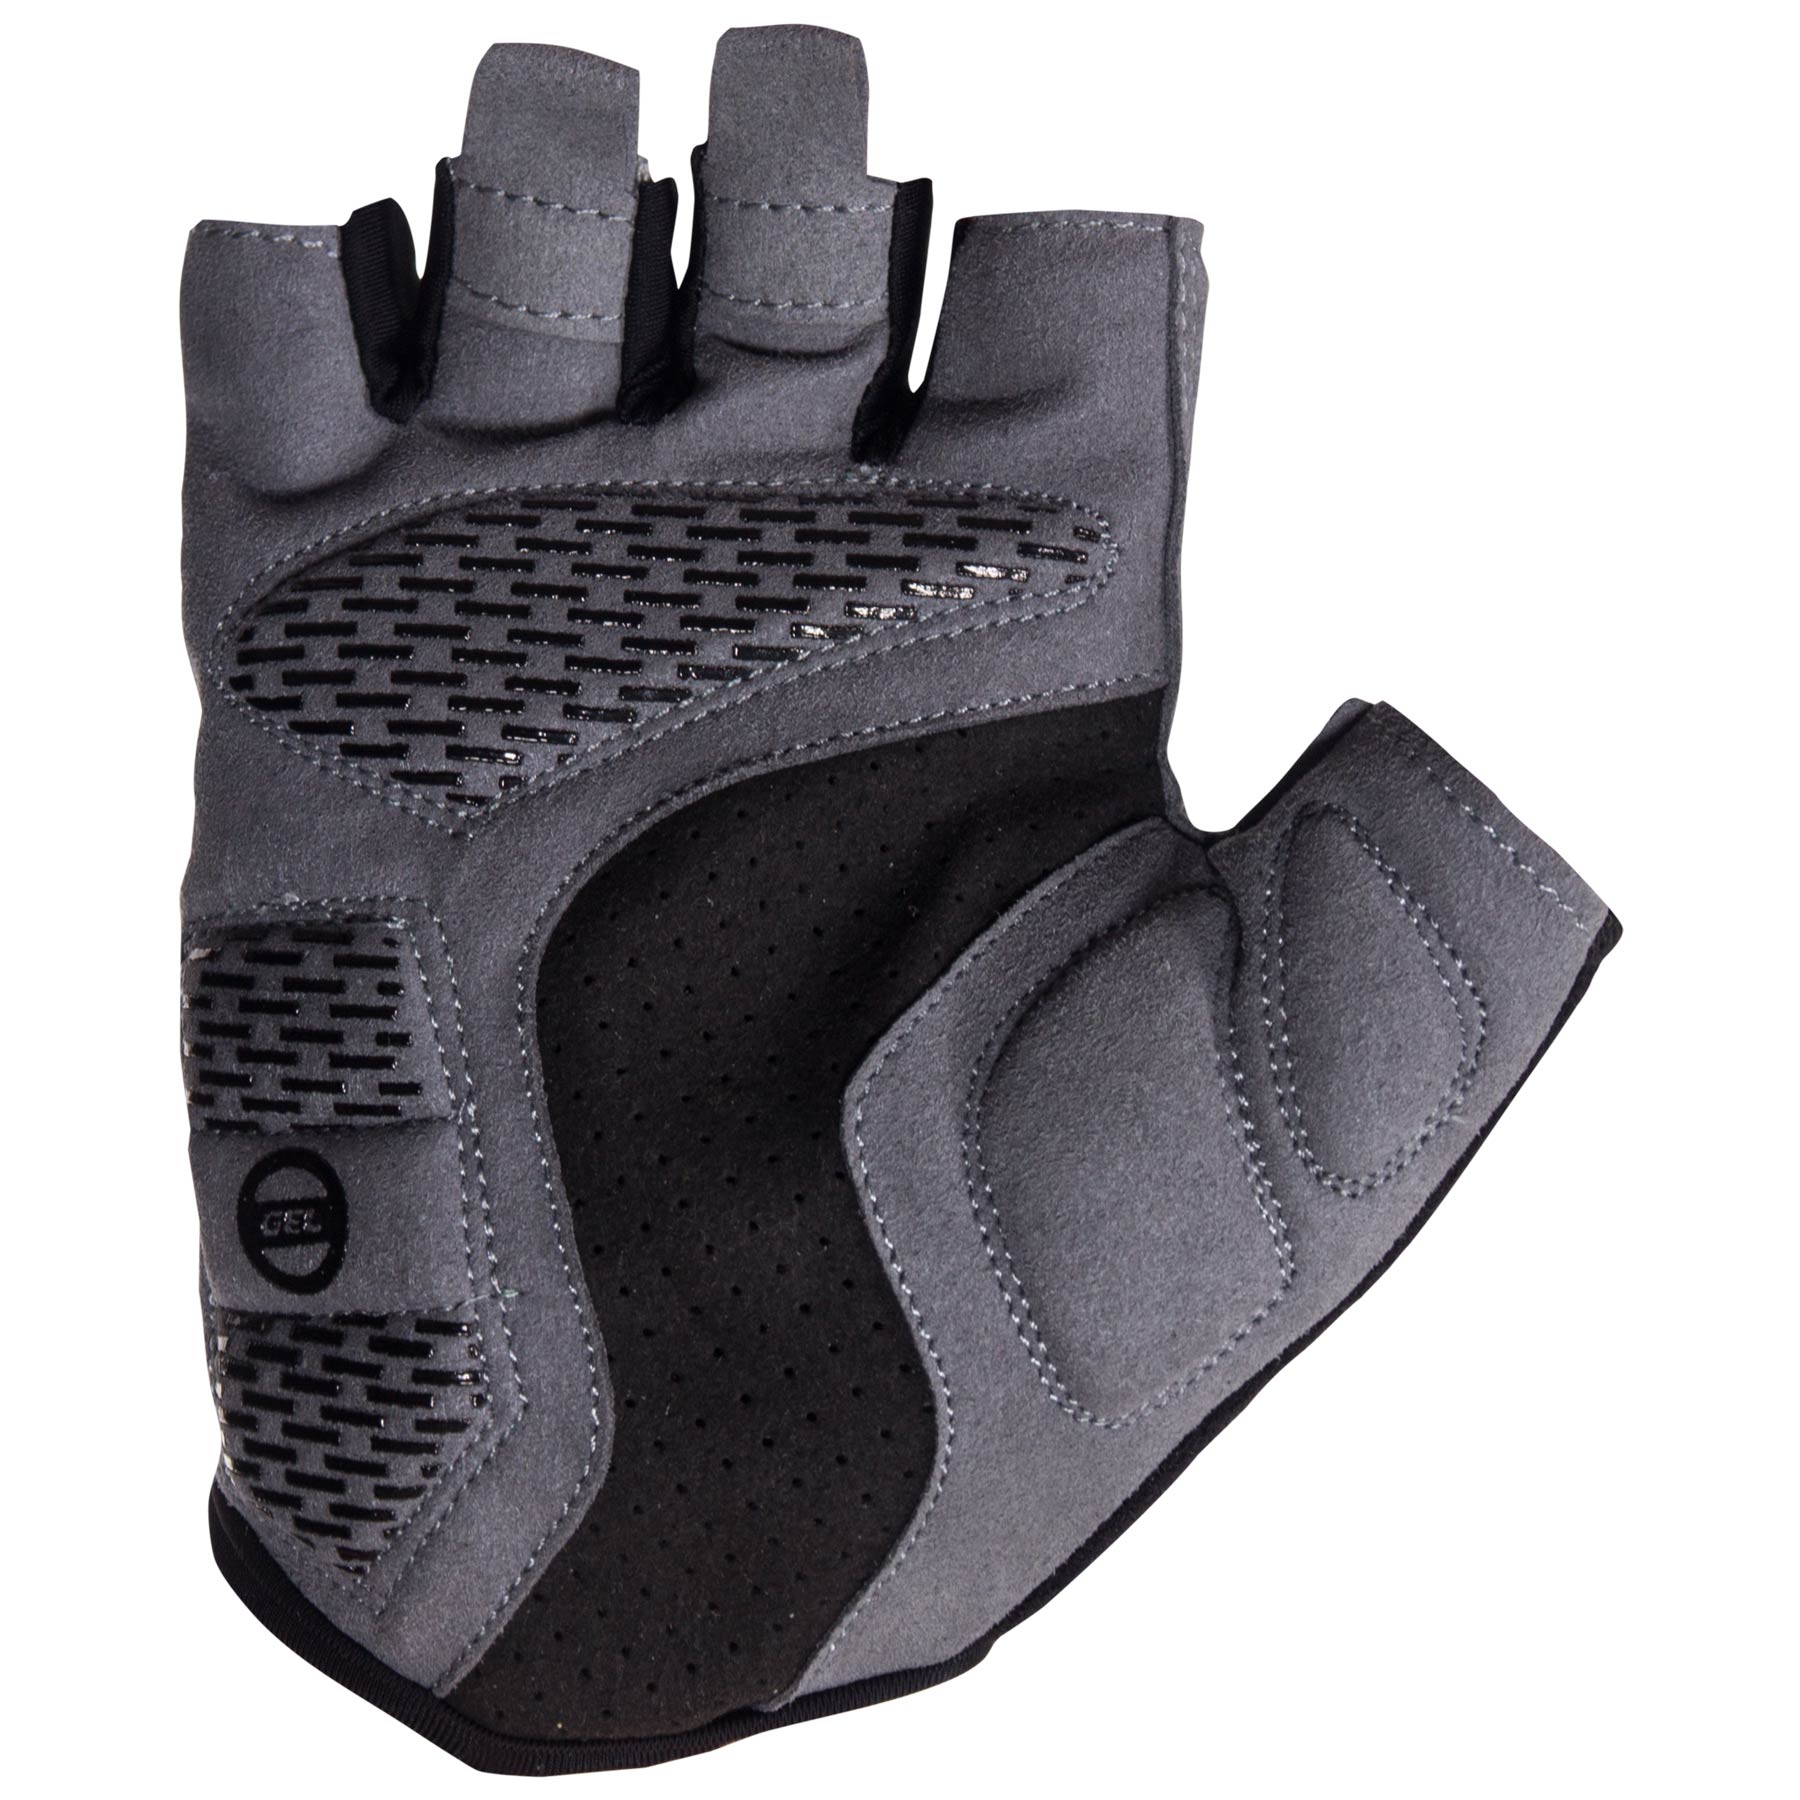 Unisex cycling gloves